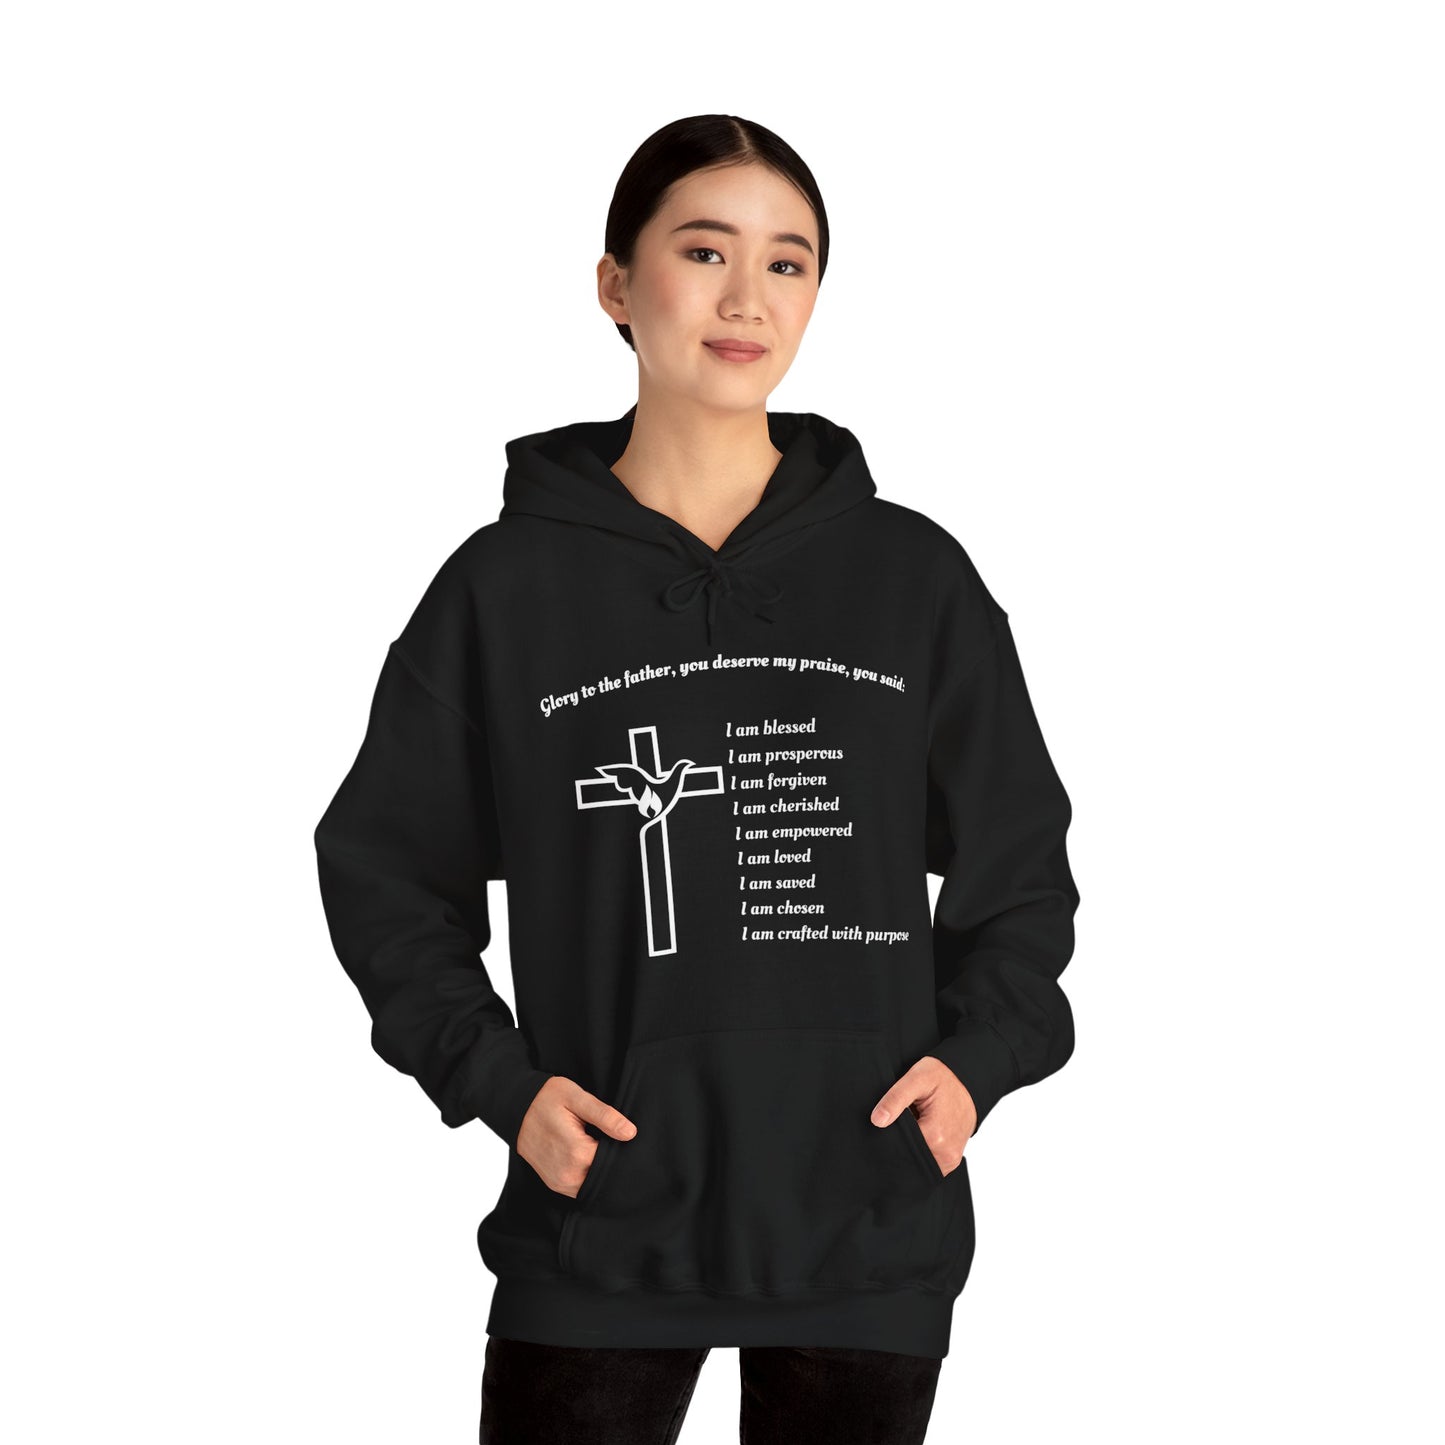 I am Glory to the Father Hooded Sweatshirt Unisex Cozy Heavy Blend23